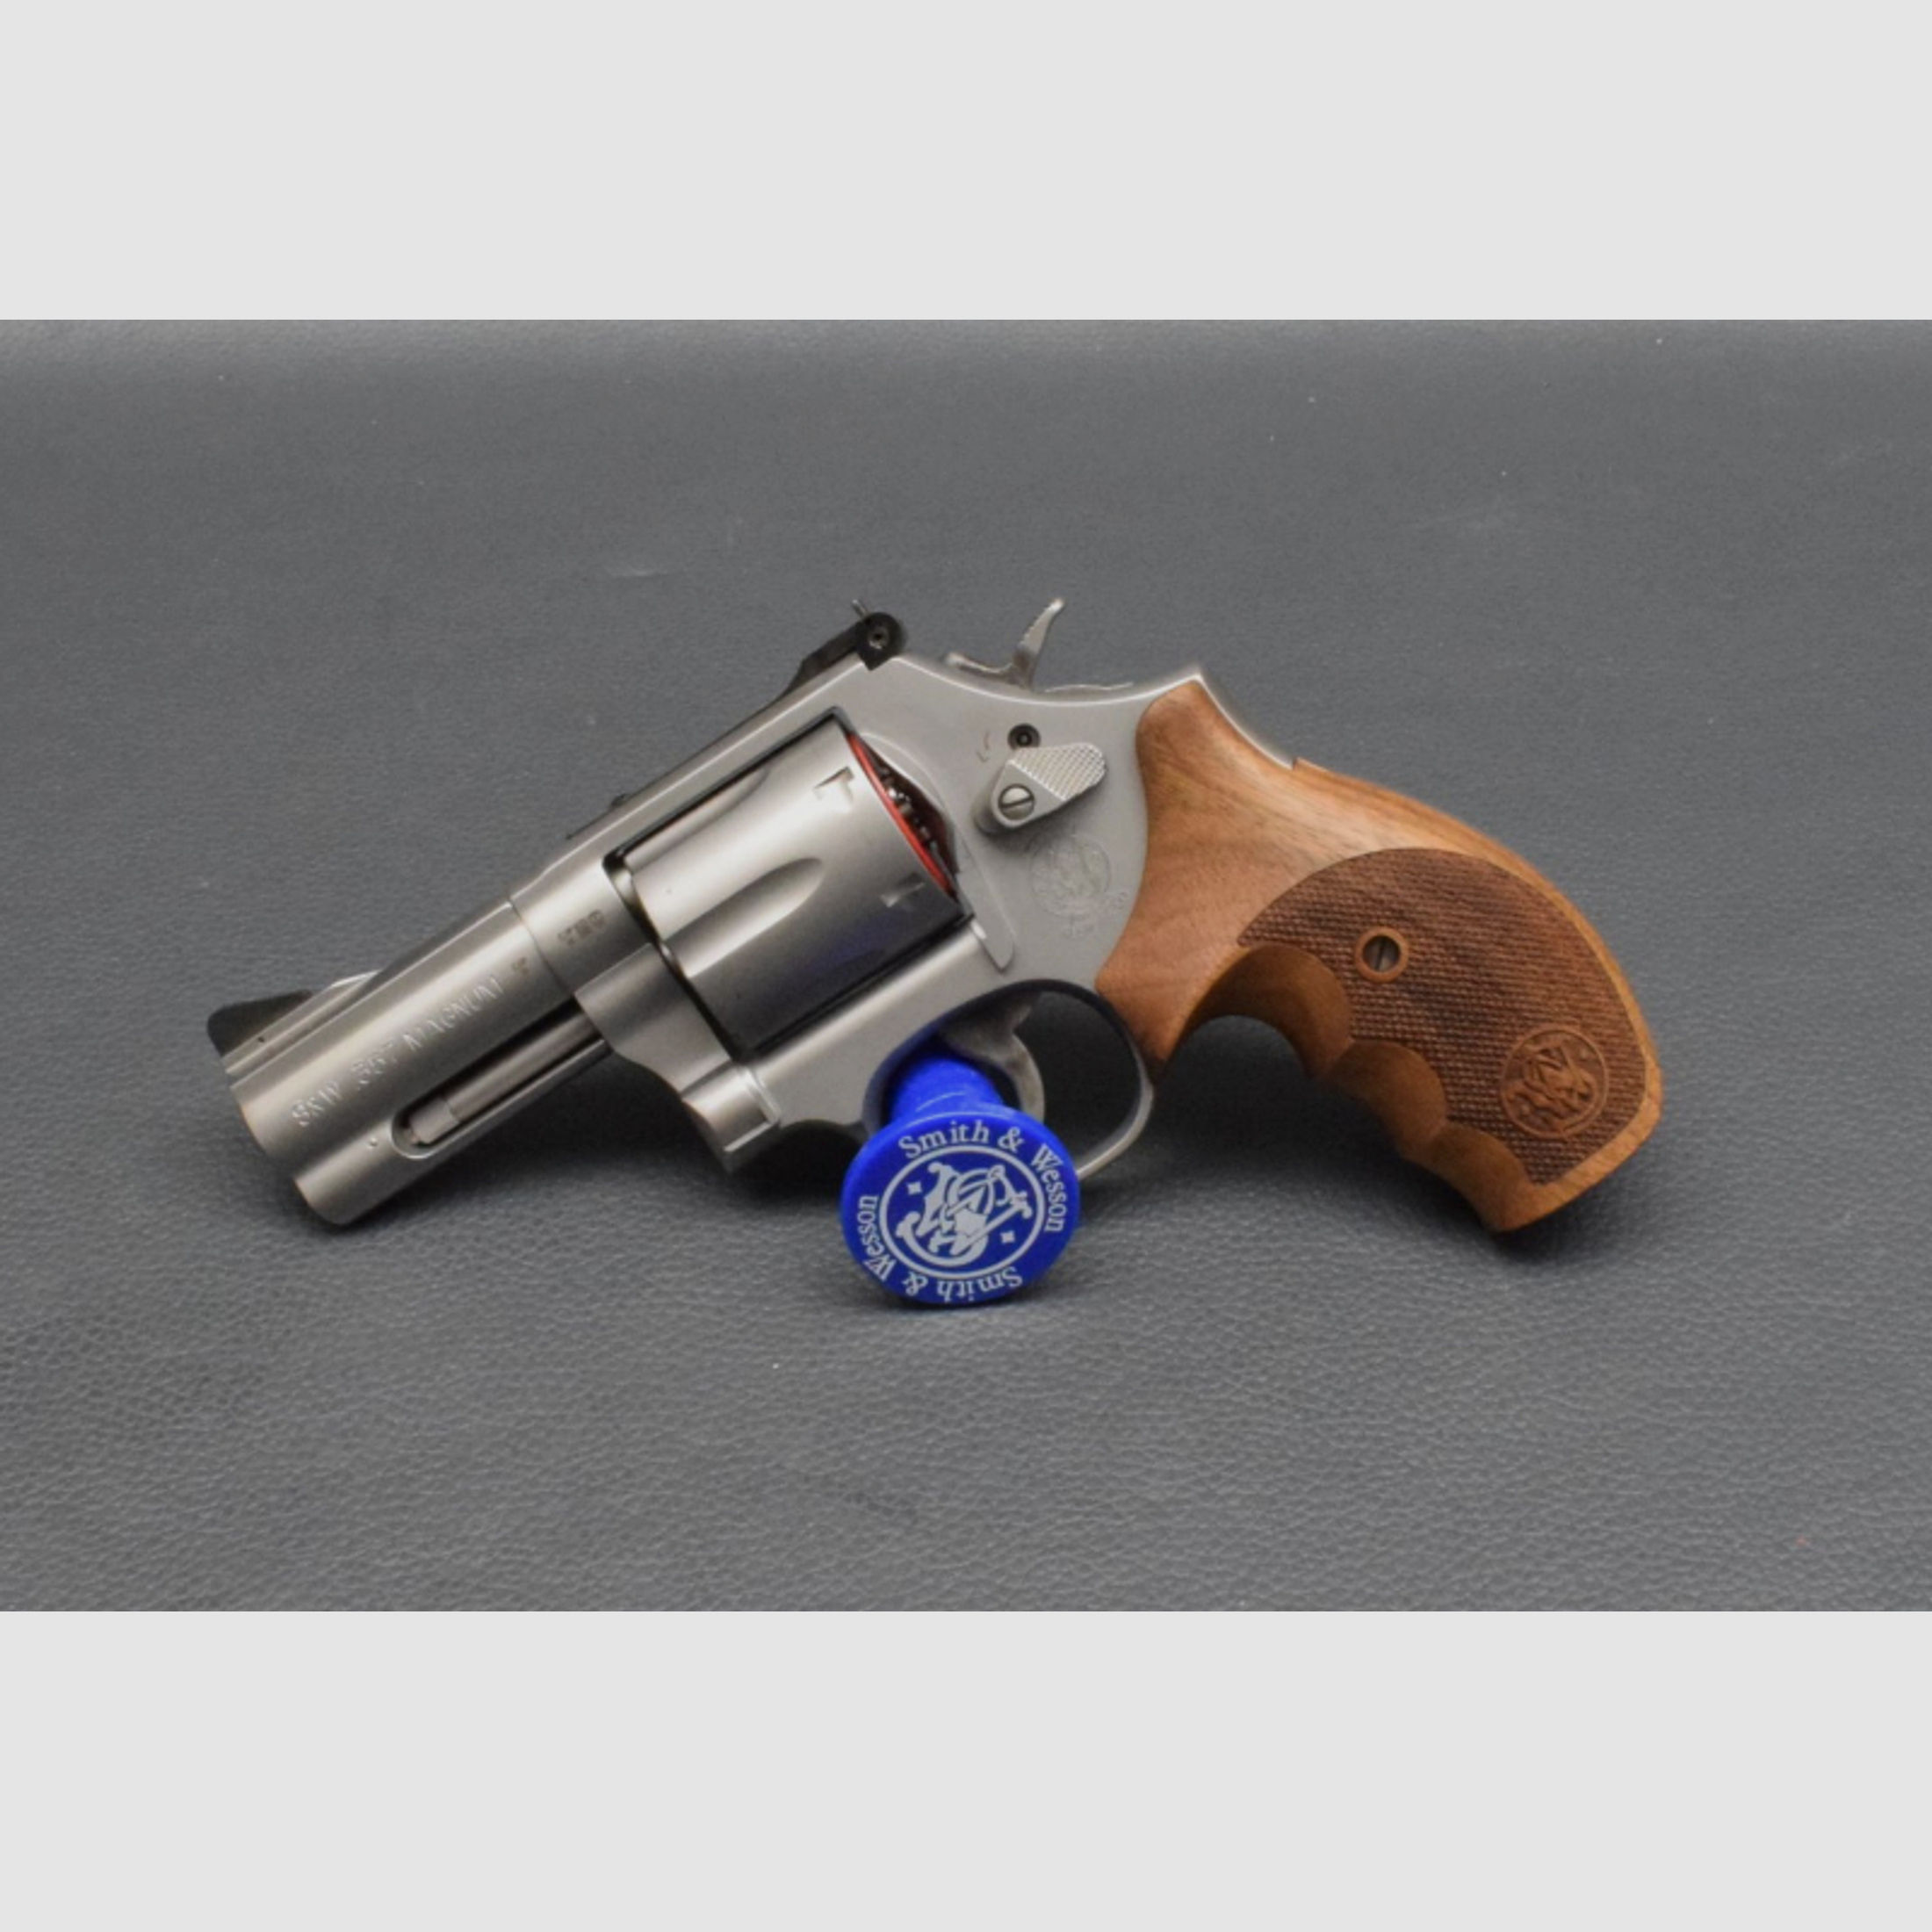 Smith & Wesson Modell 686 Security Special, 357 Magnum, 3" Lauf, Holzgriff, Neuware